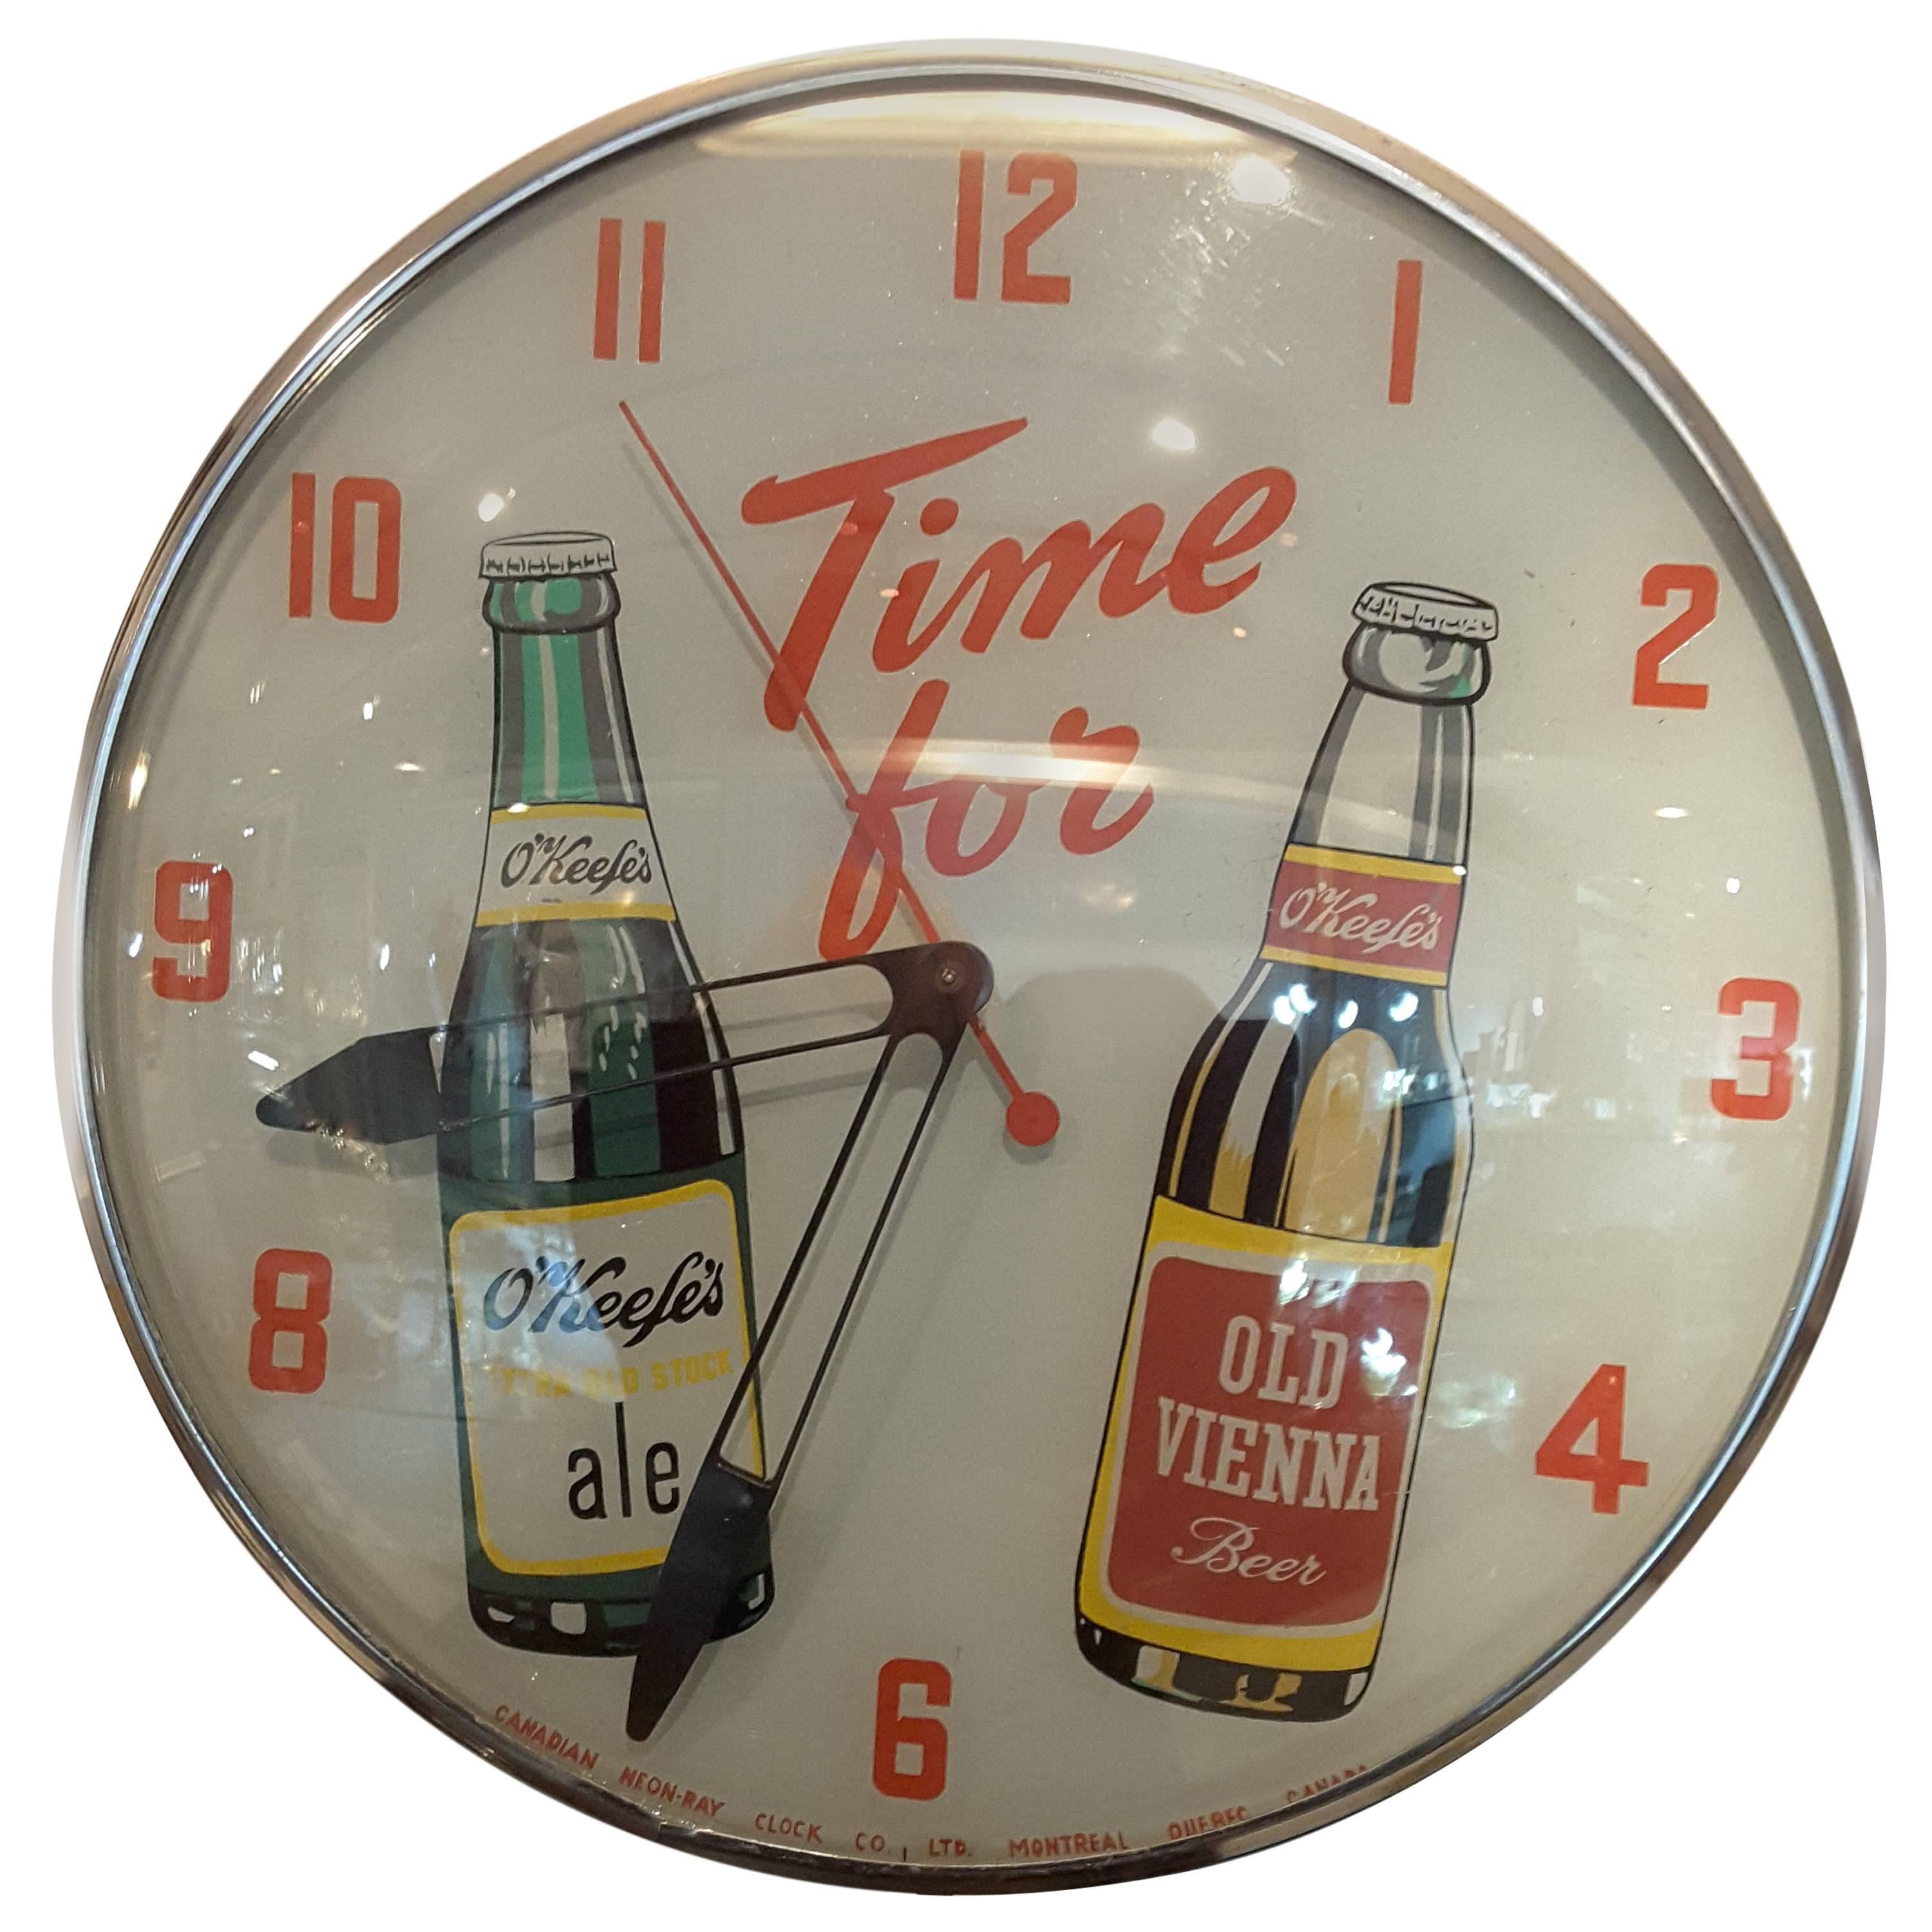 O'keefe's Advertising Clock, Back Lit by Neon-Ray Clock Co.